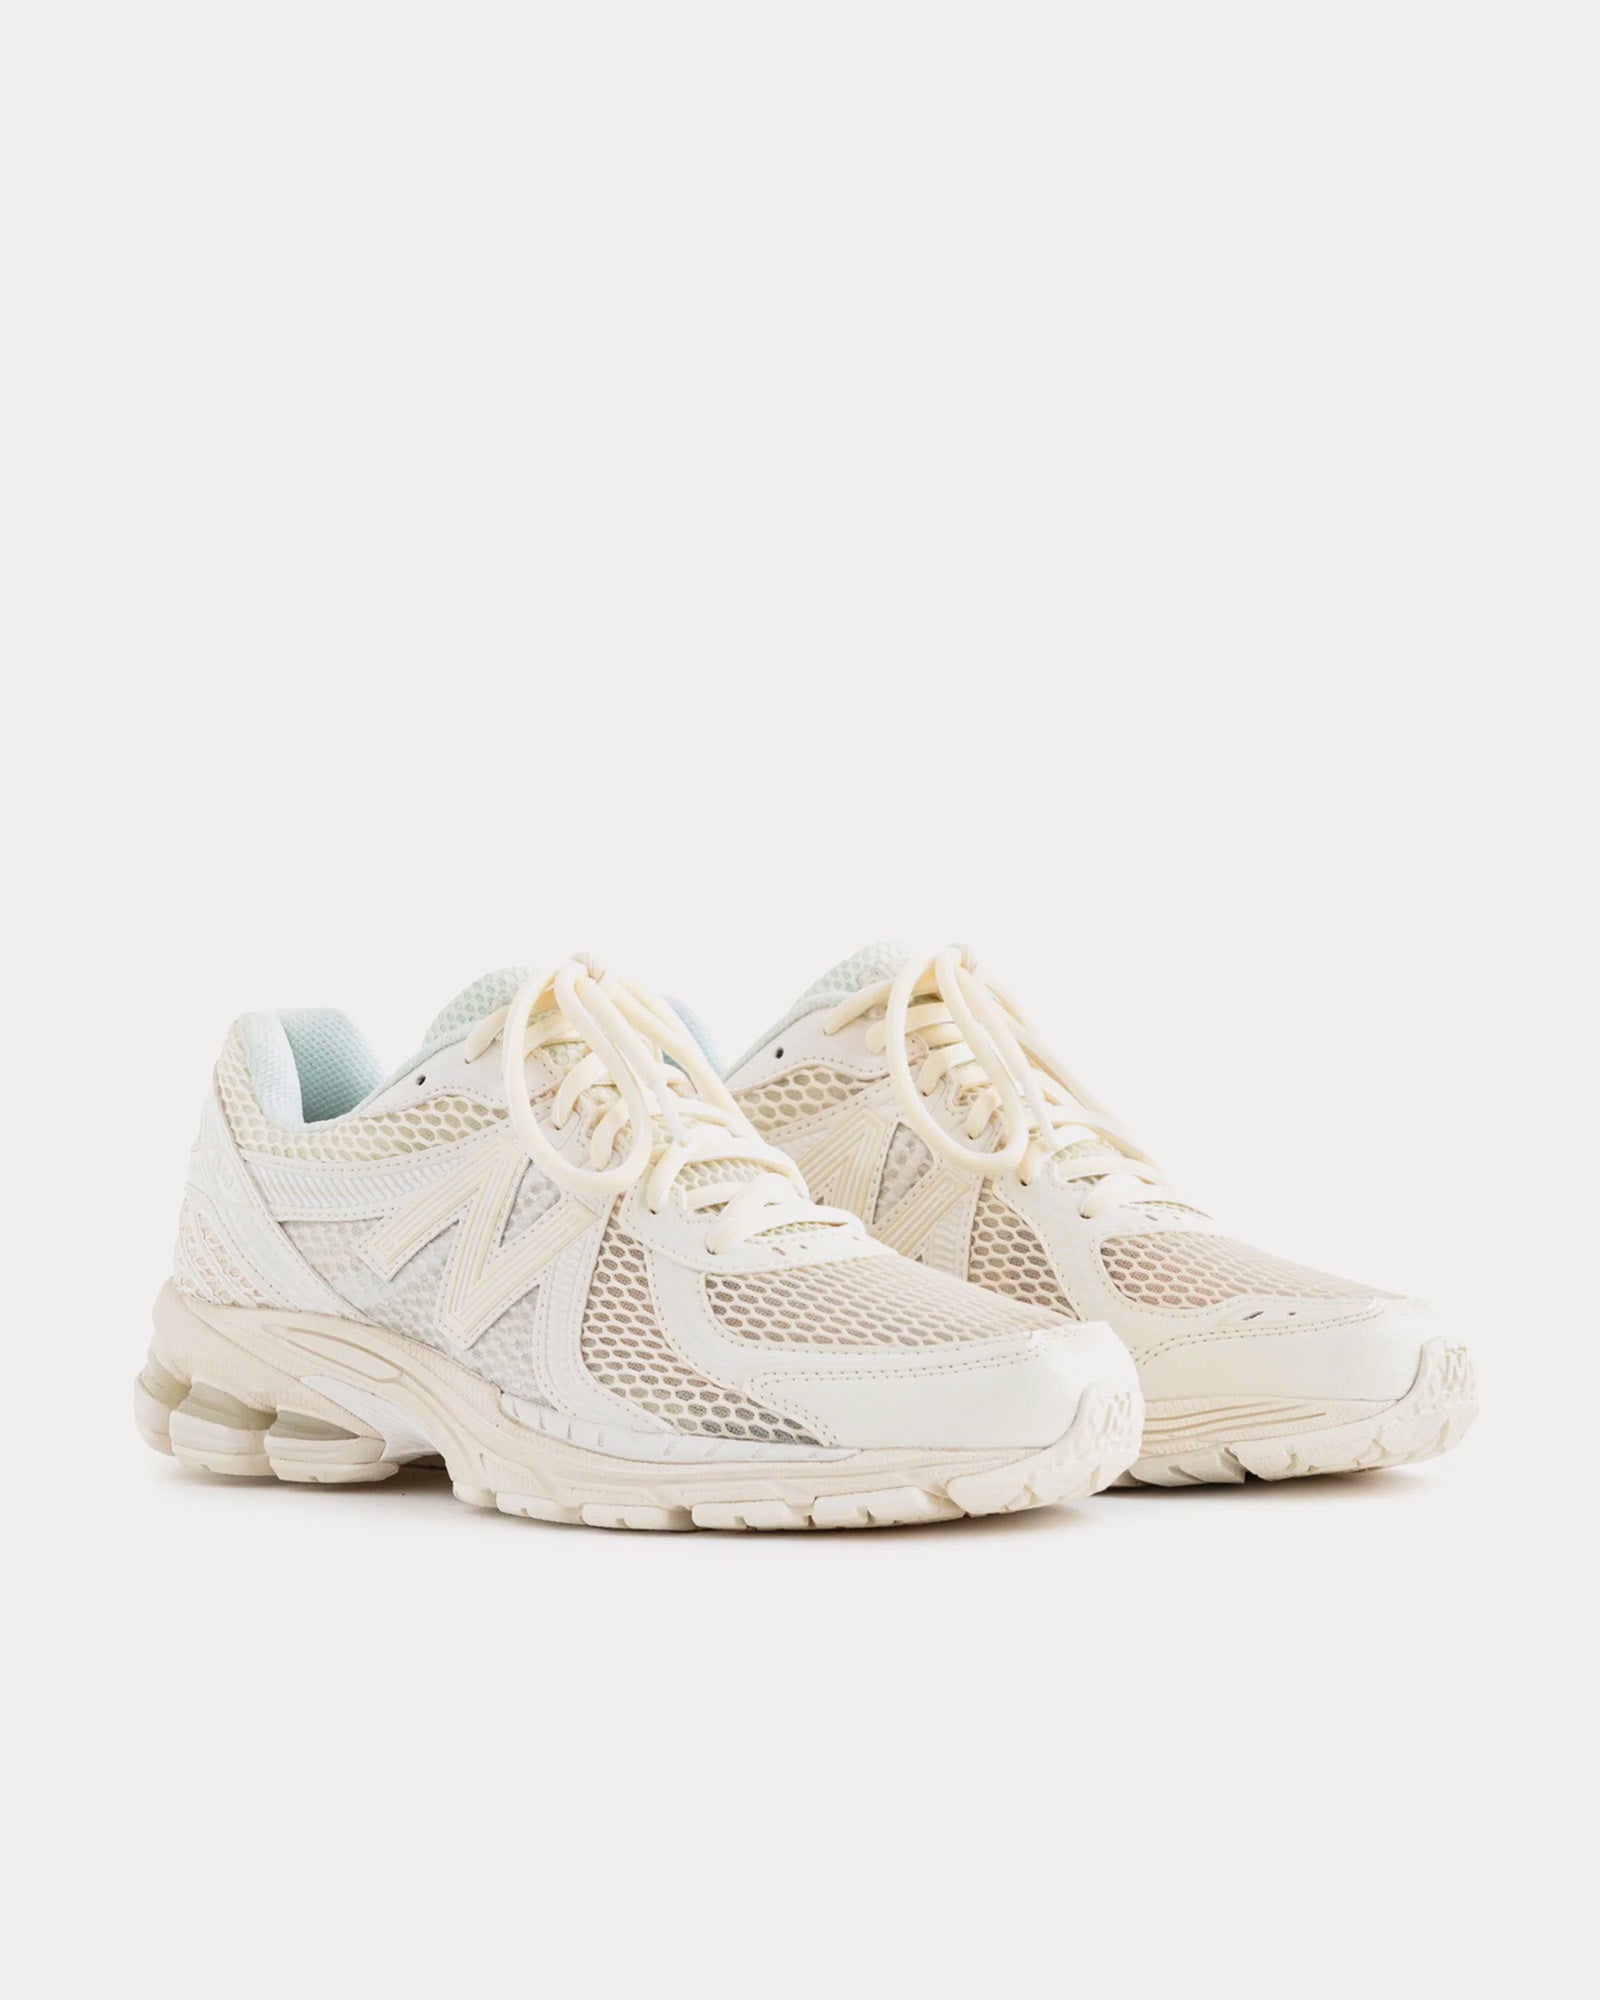 New Balance x Aime Leon Dore - 860v2 White Low Top Sneakers